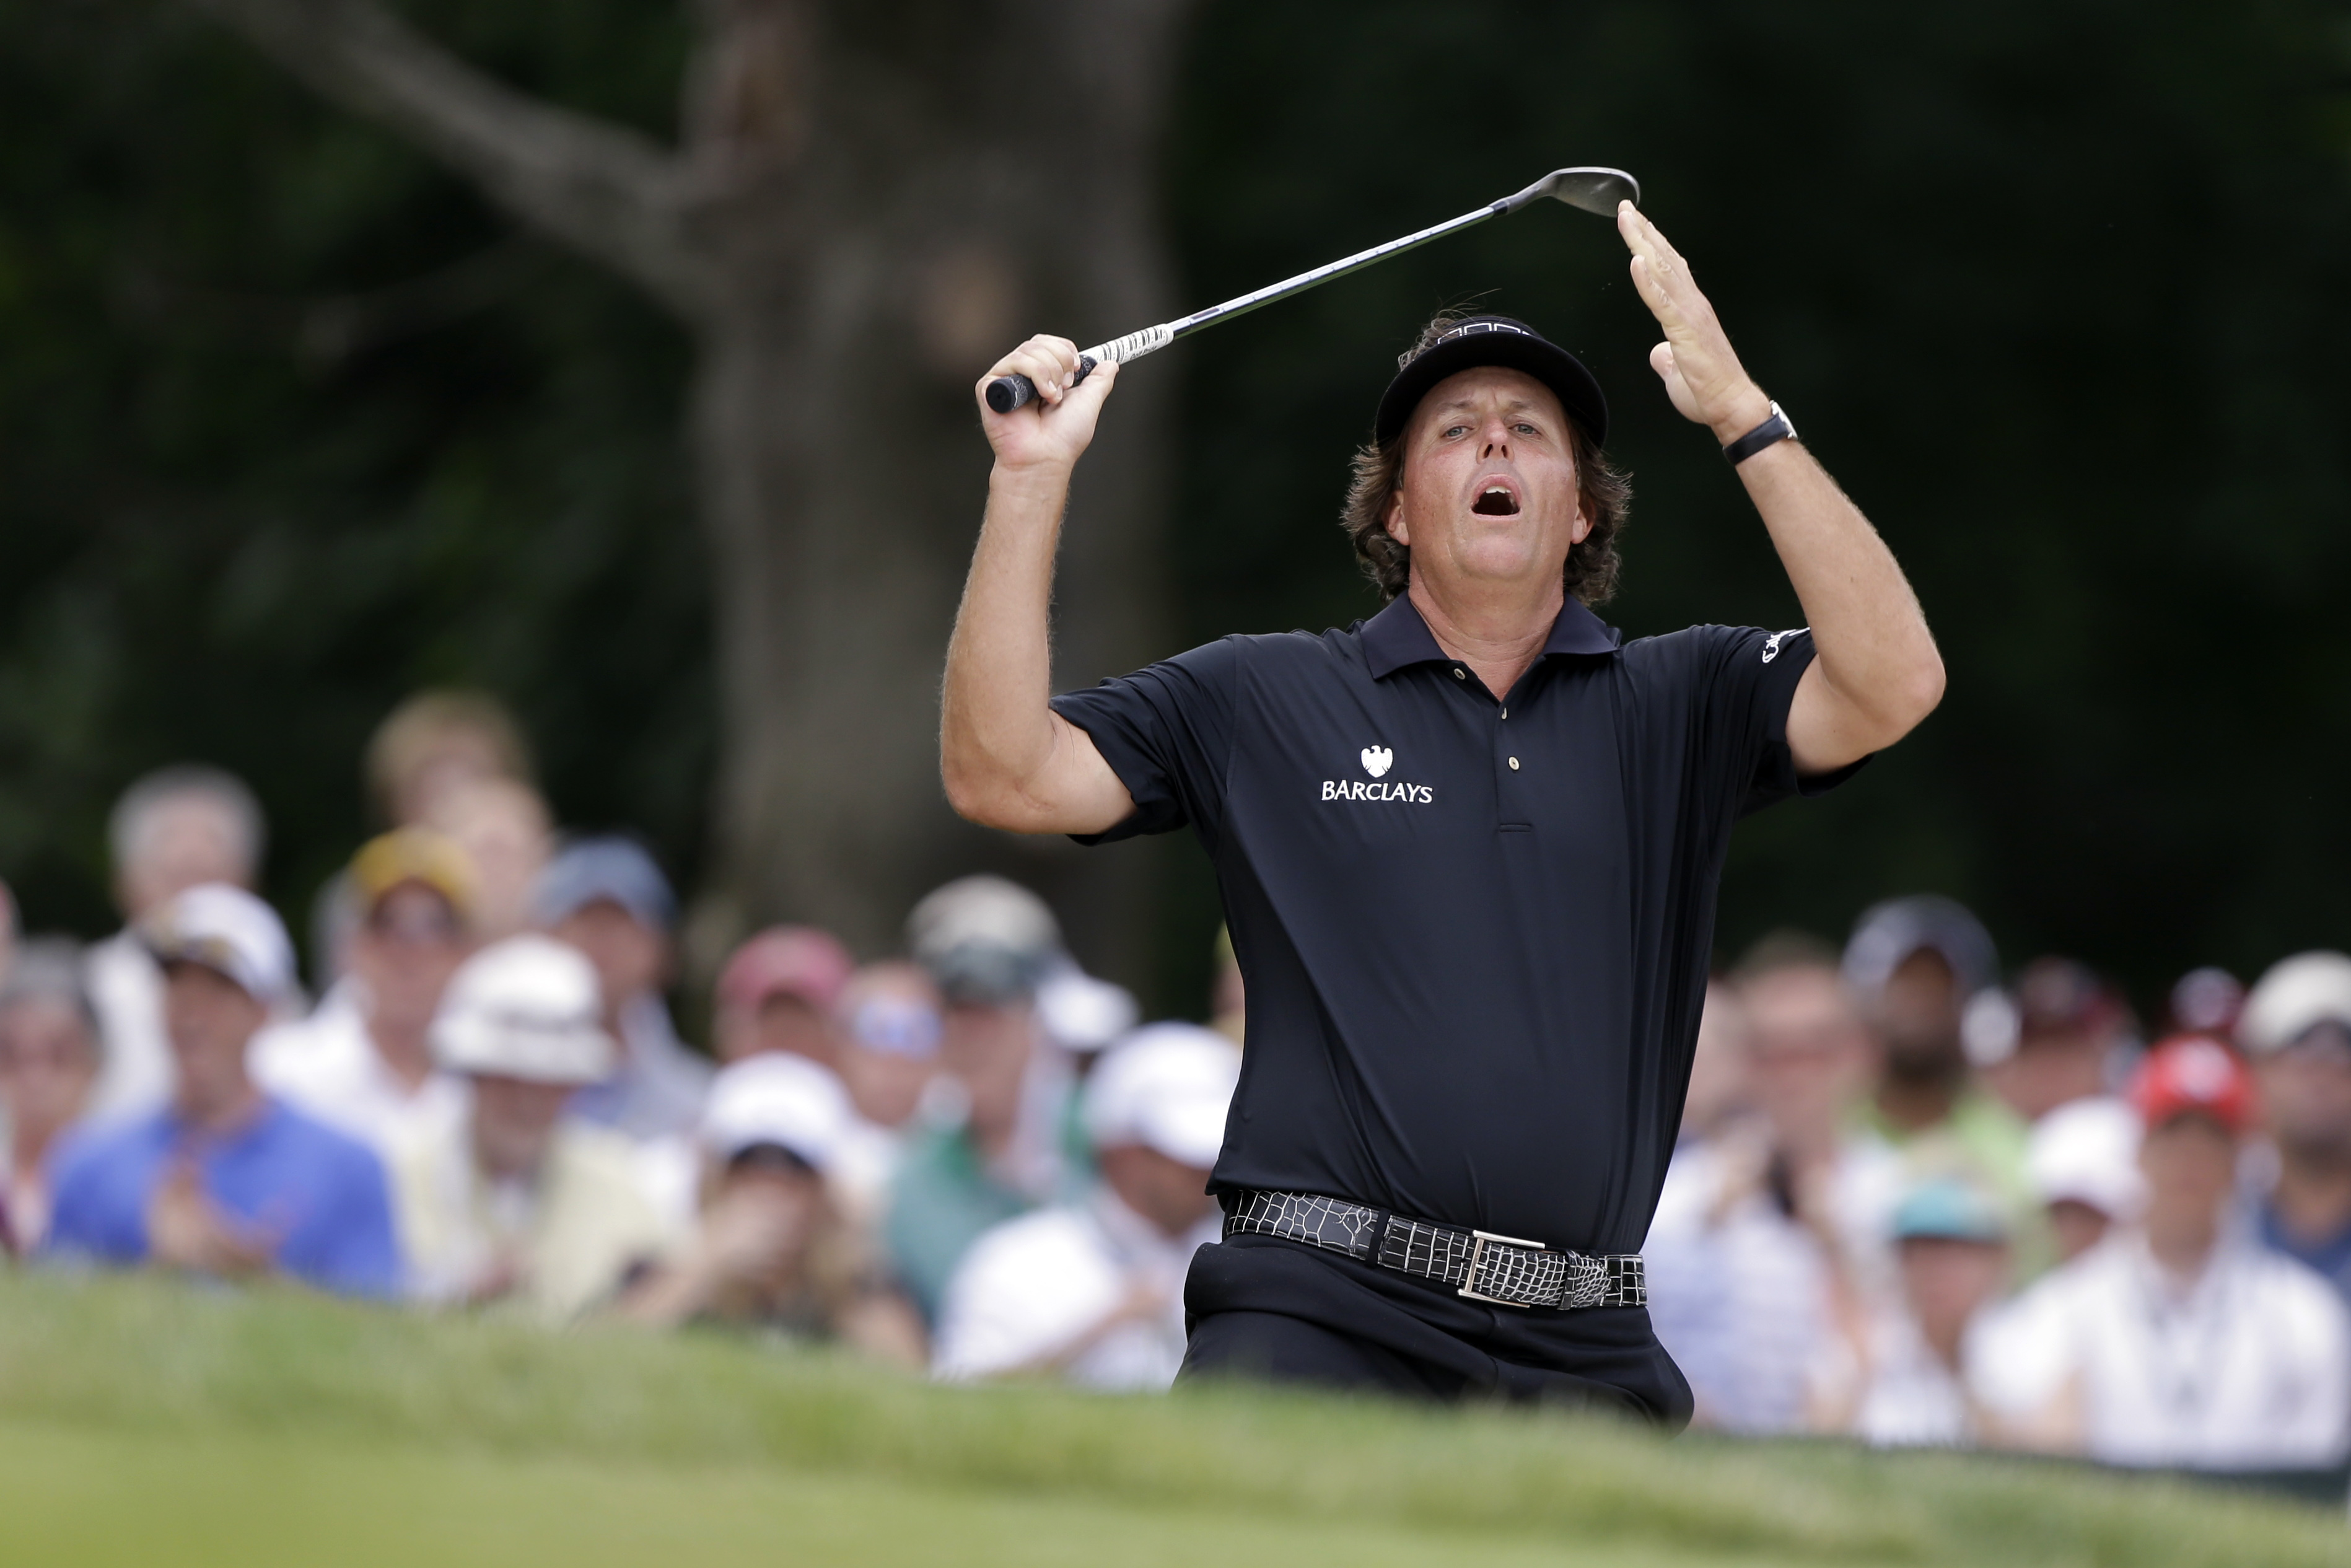 Phil Mickelson finished second at Merion, his sixth U.S. Open runner-up finish. (AP)